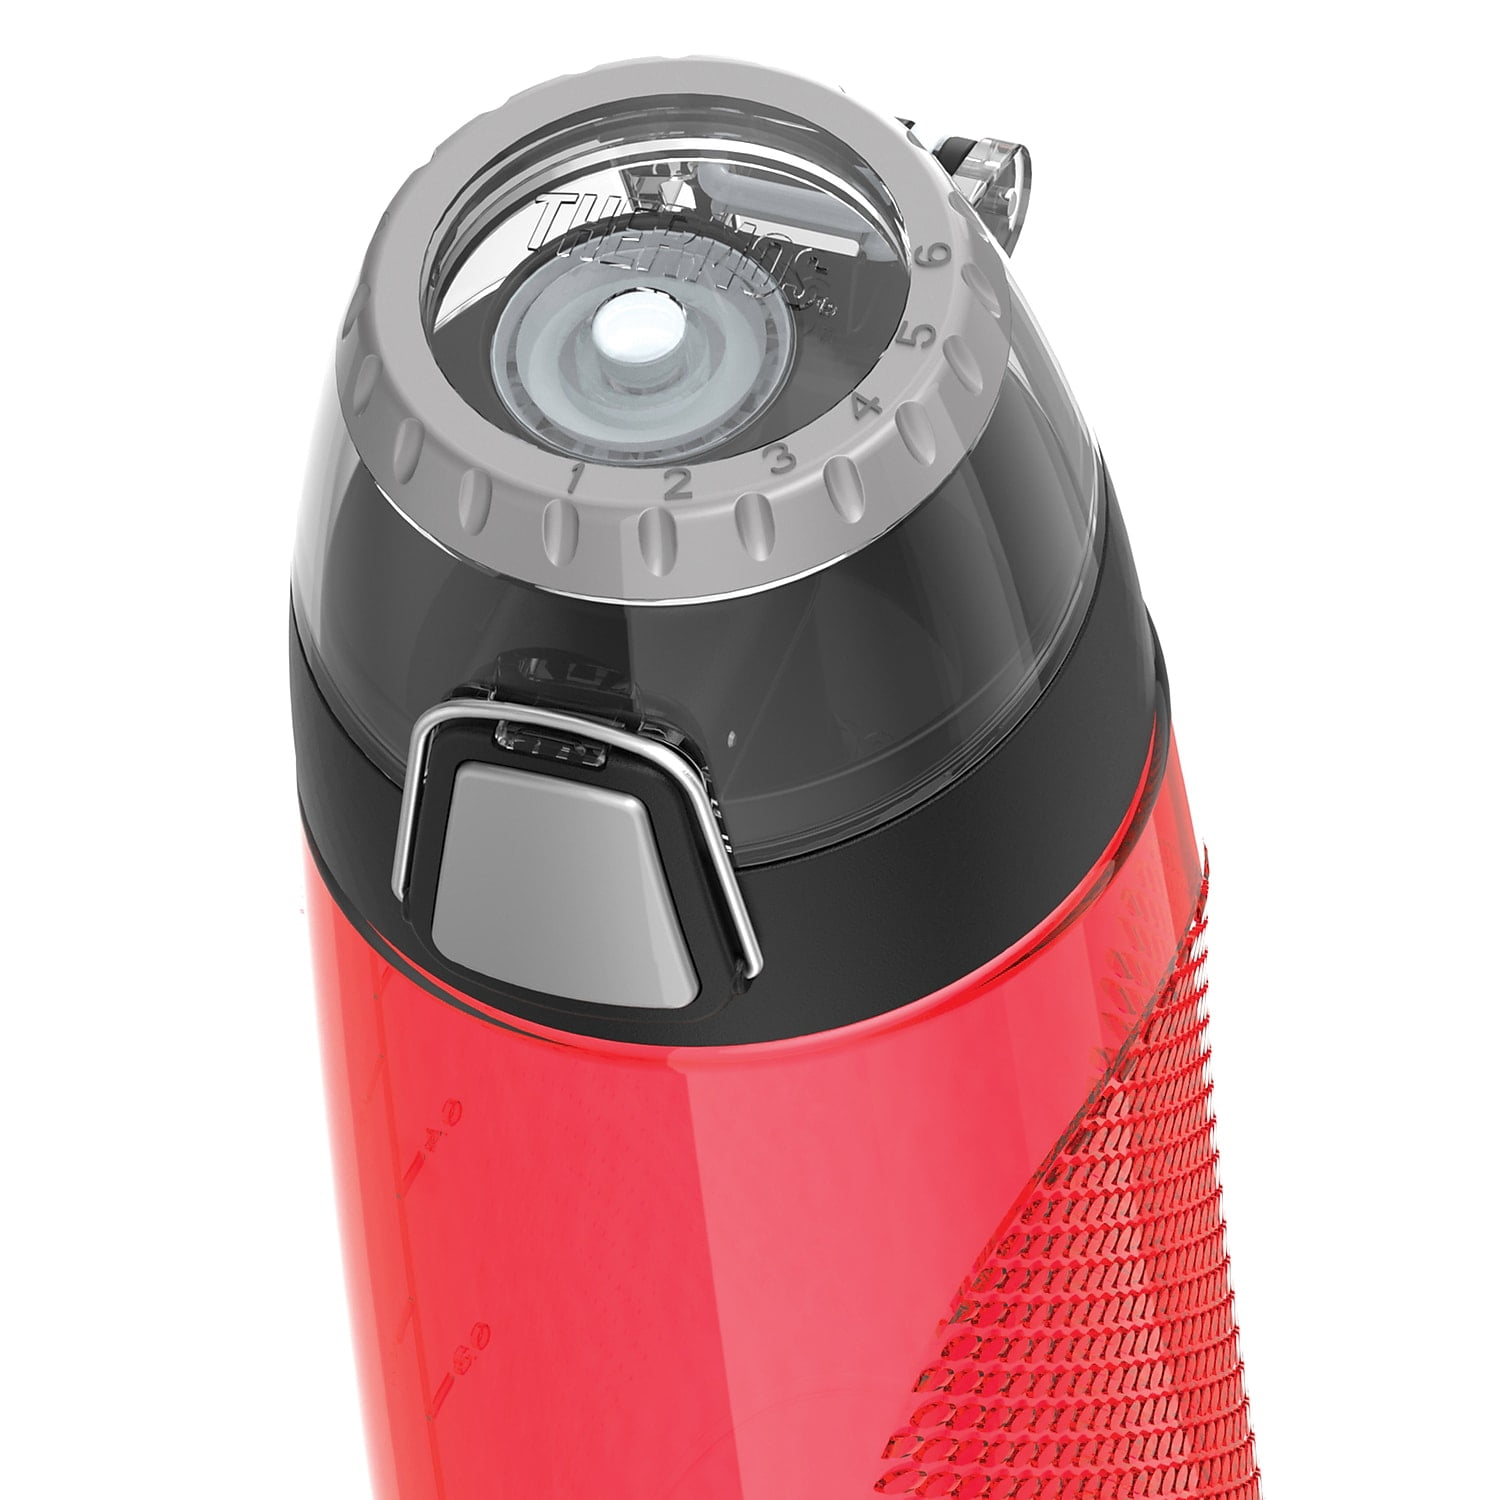  KUULii - Thermos Bottle Portable Cooler, Stainless